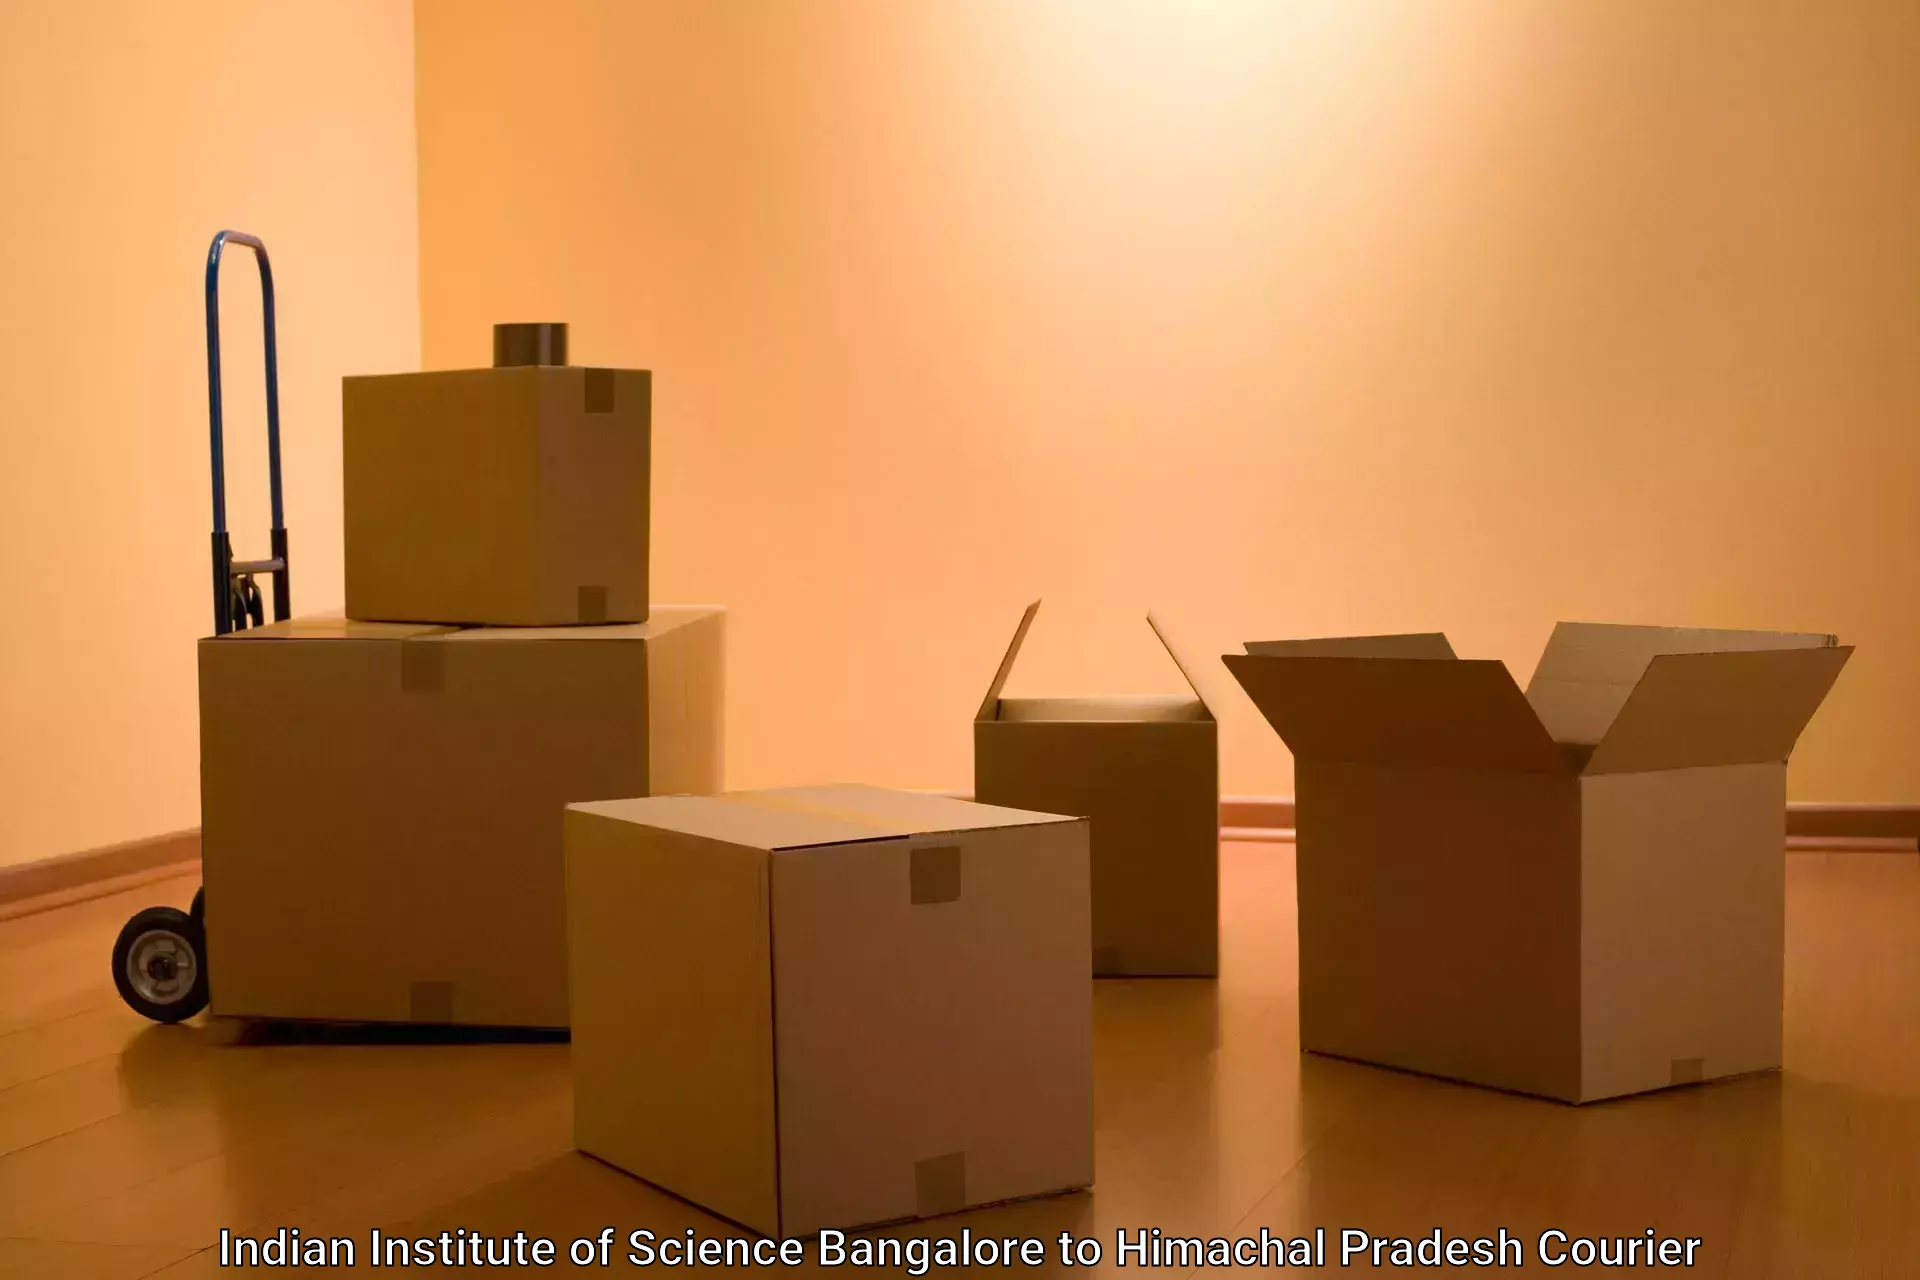 Nationwide shipping coverage Indian Institute of Science Bangalore to Himachal Pradesh